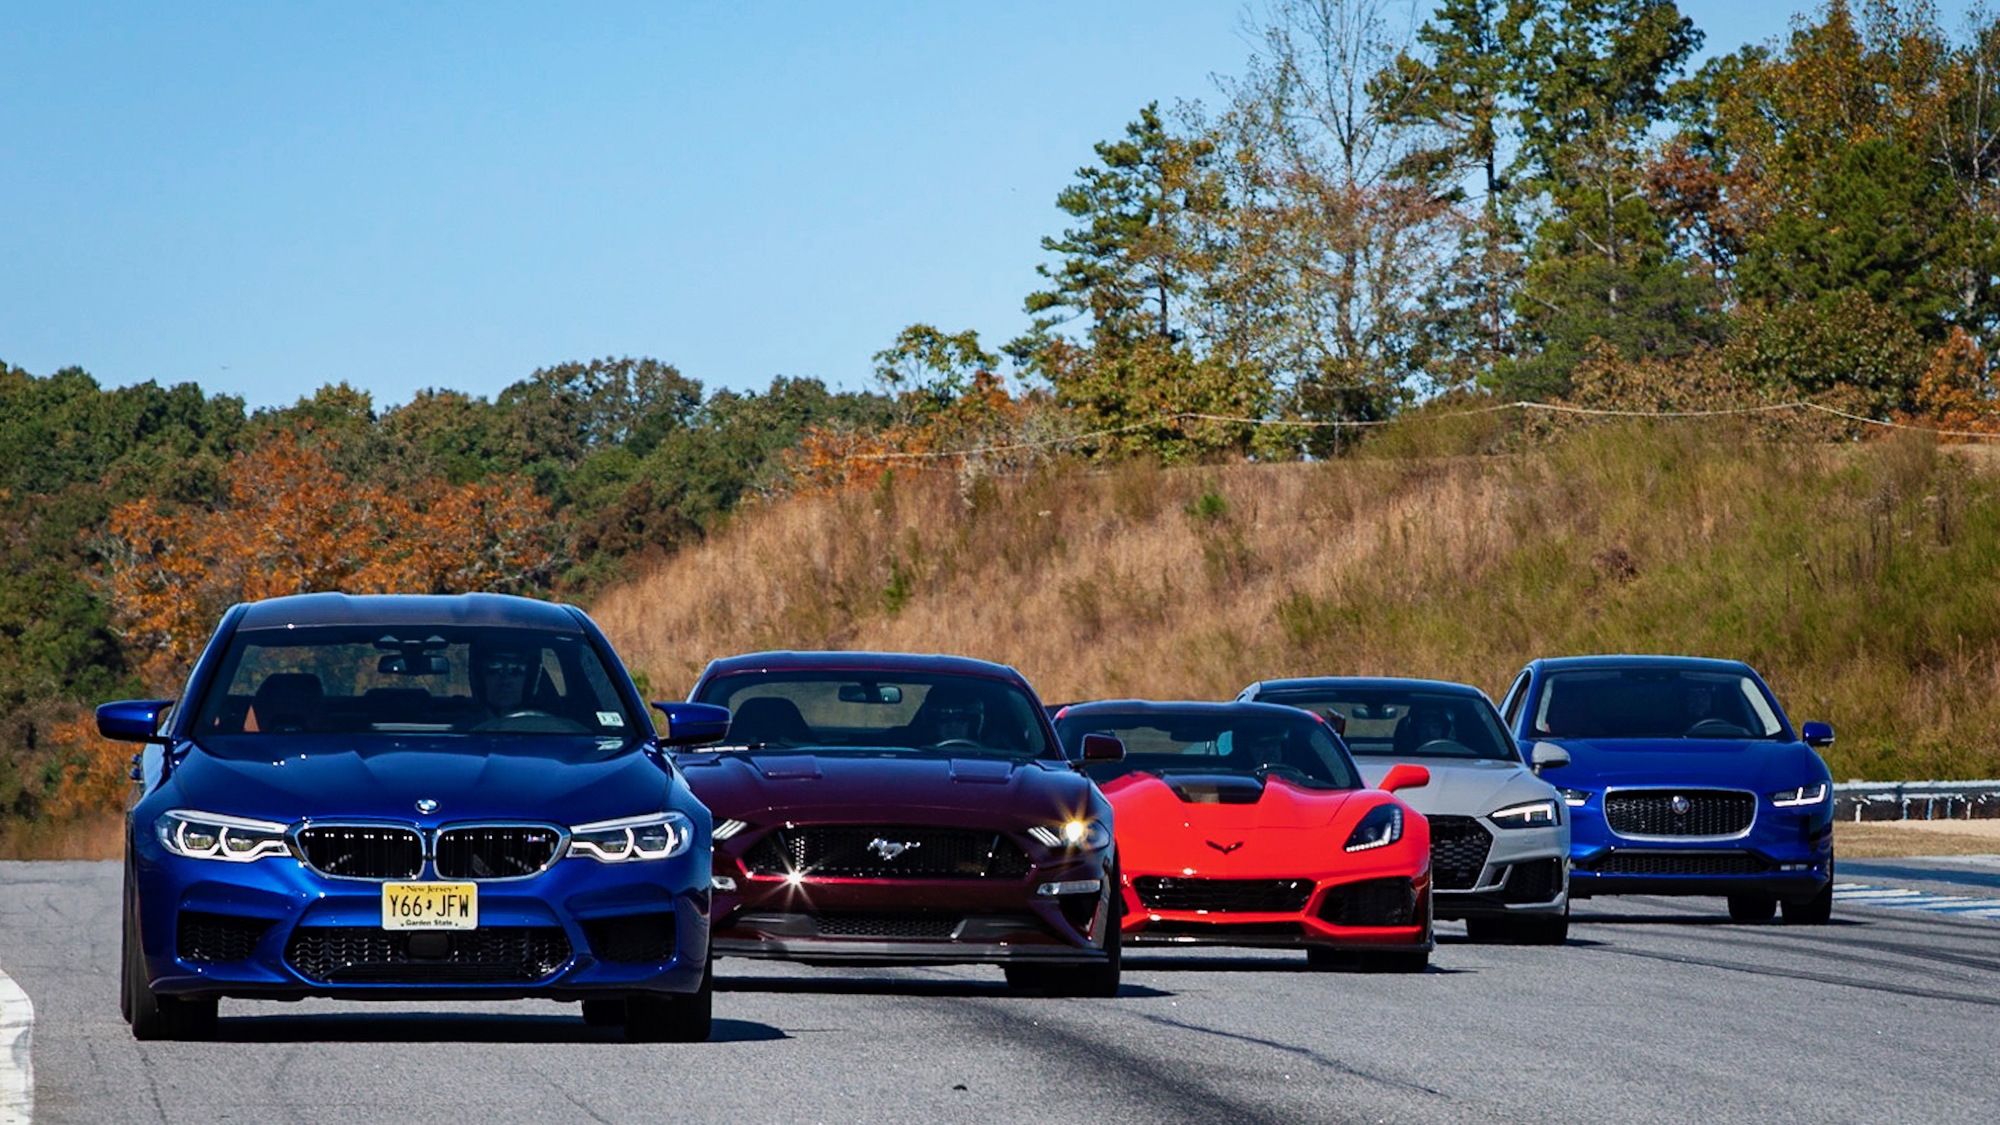 Motor Authority Best Car To Buy 2019 finalists